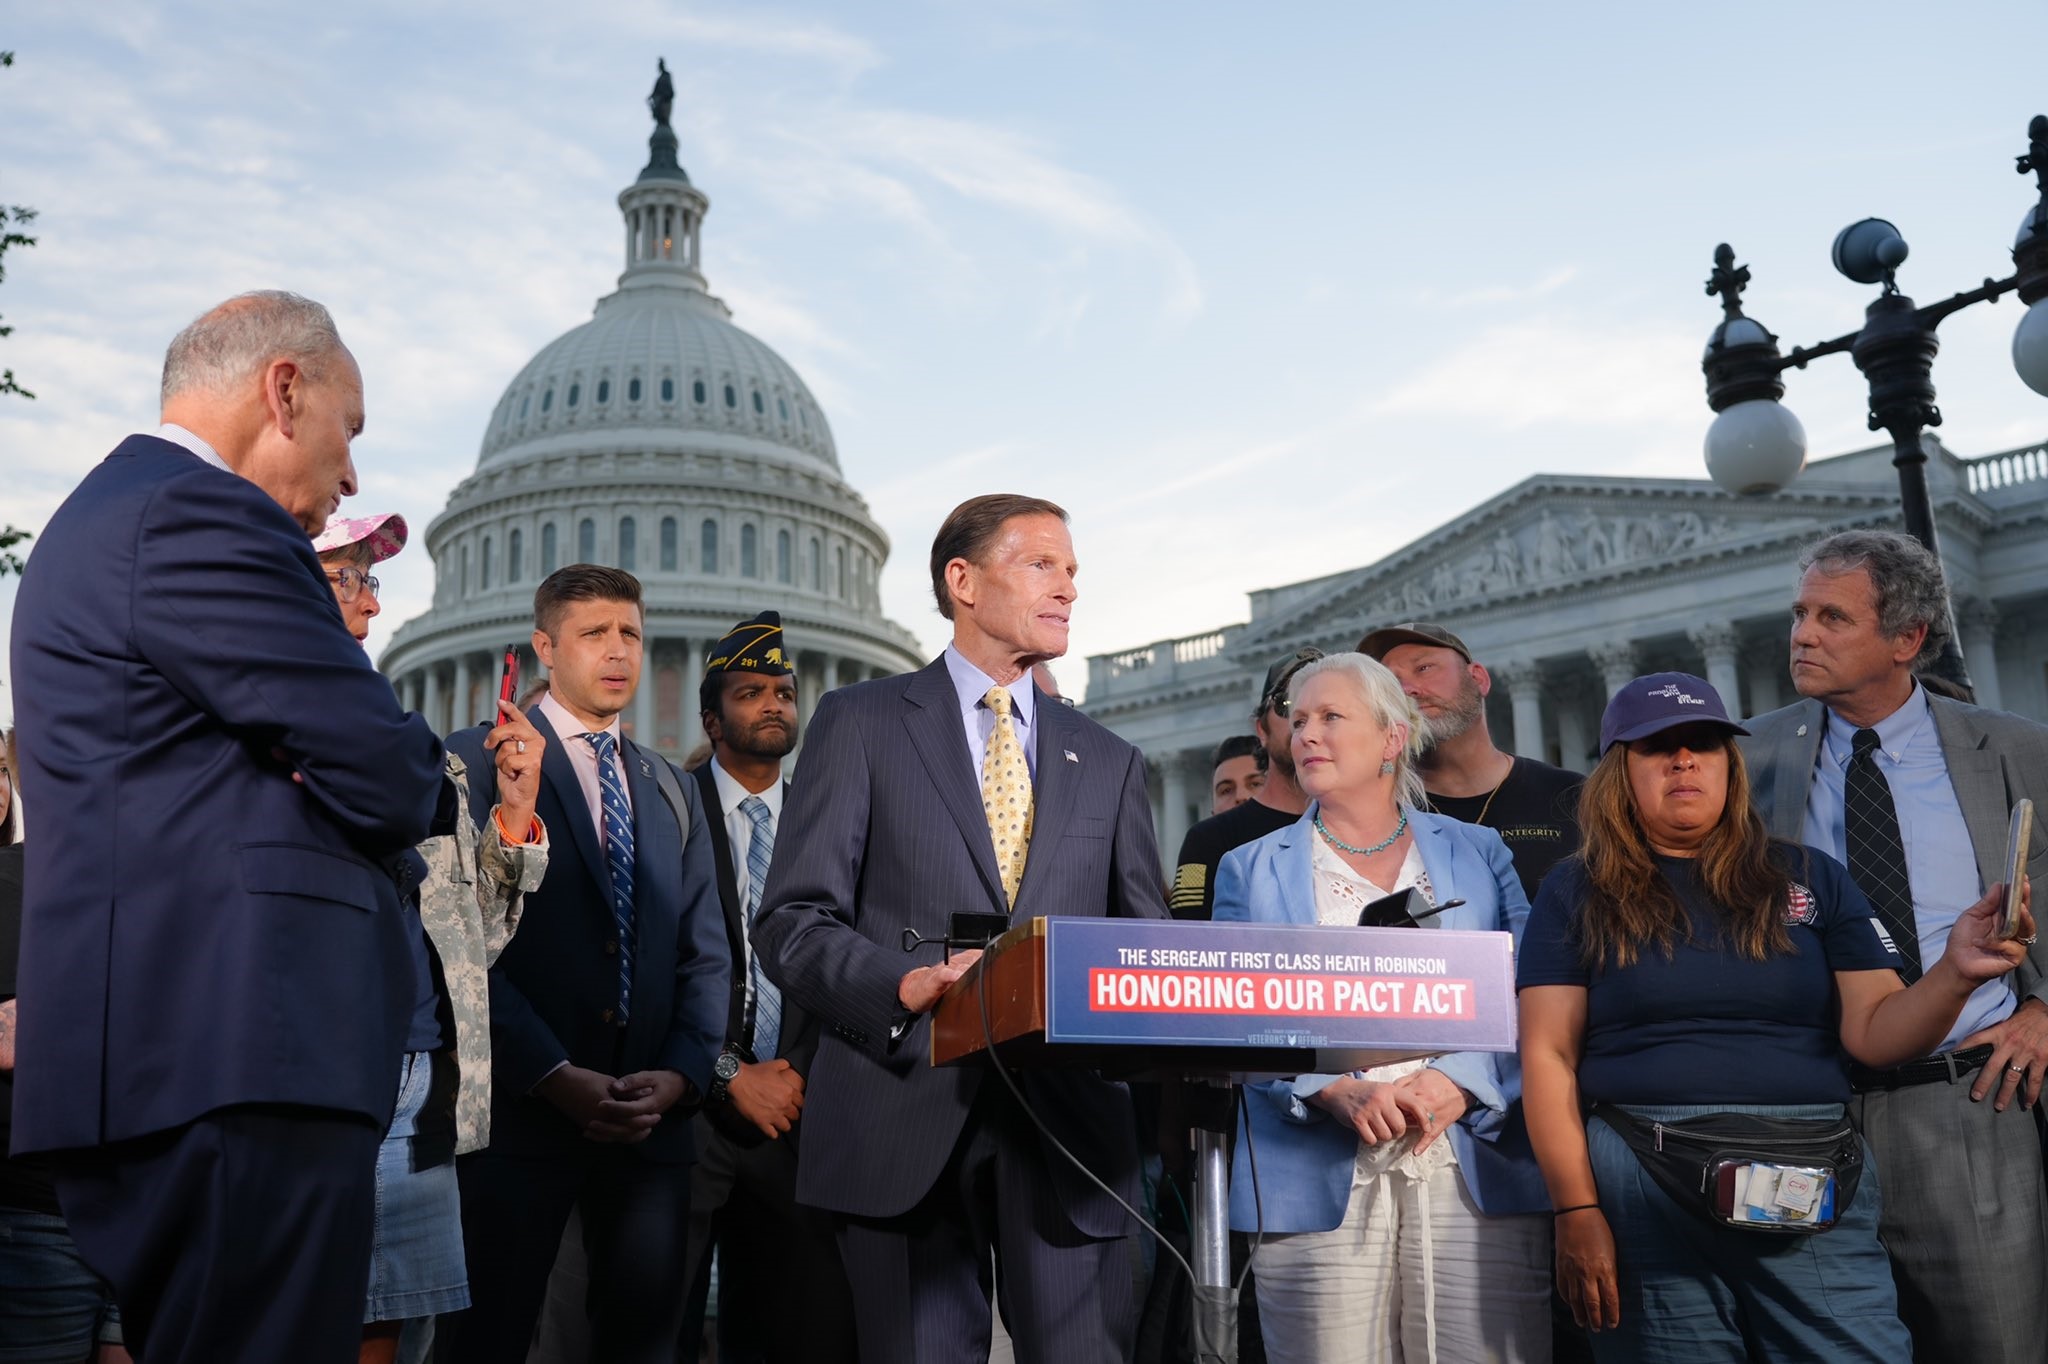 Blumenthal, a member of the Senate Veterans’ Affairs Committee, helped pass comprehensive legislation to deliver healthcare and benefits to multiple generations of veterans exposed to dangerous toxins. 